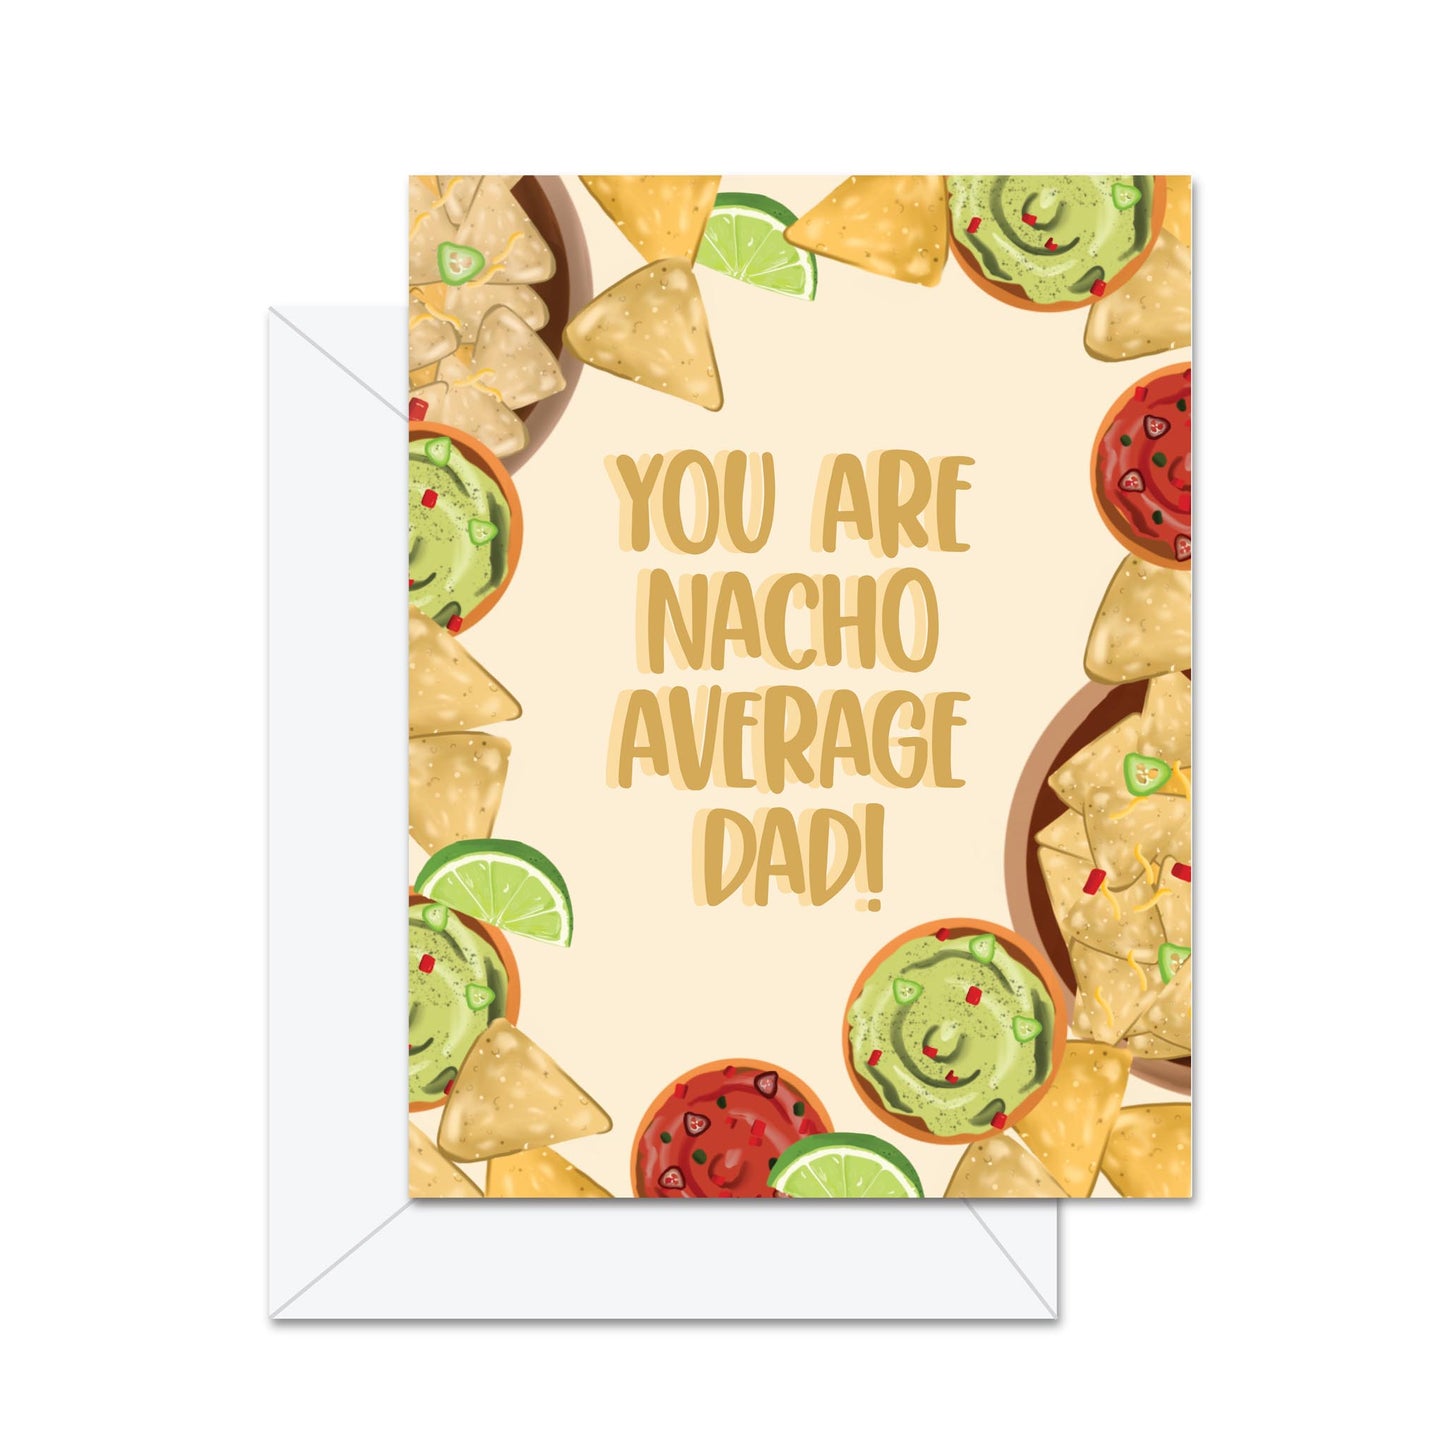 You Are Nacho Average Dad! - Greeting Card